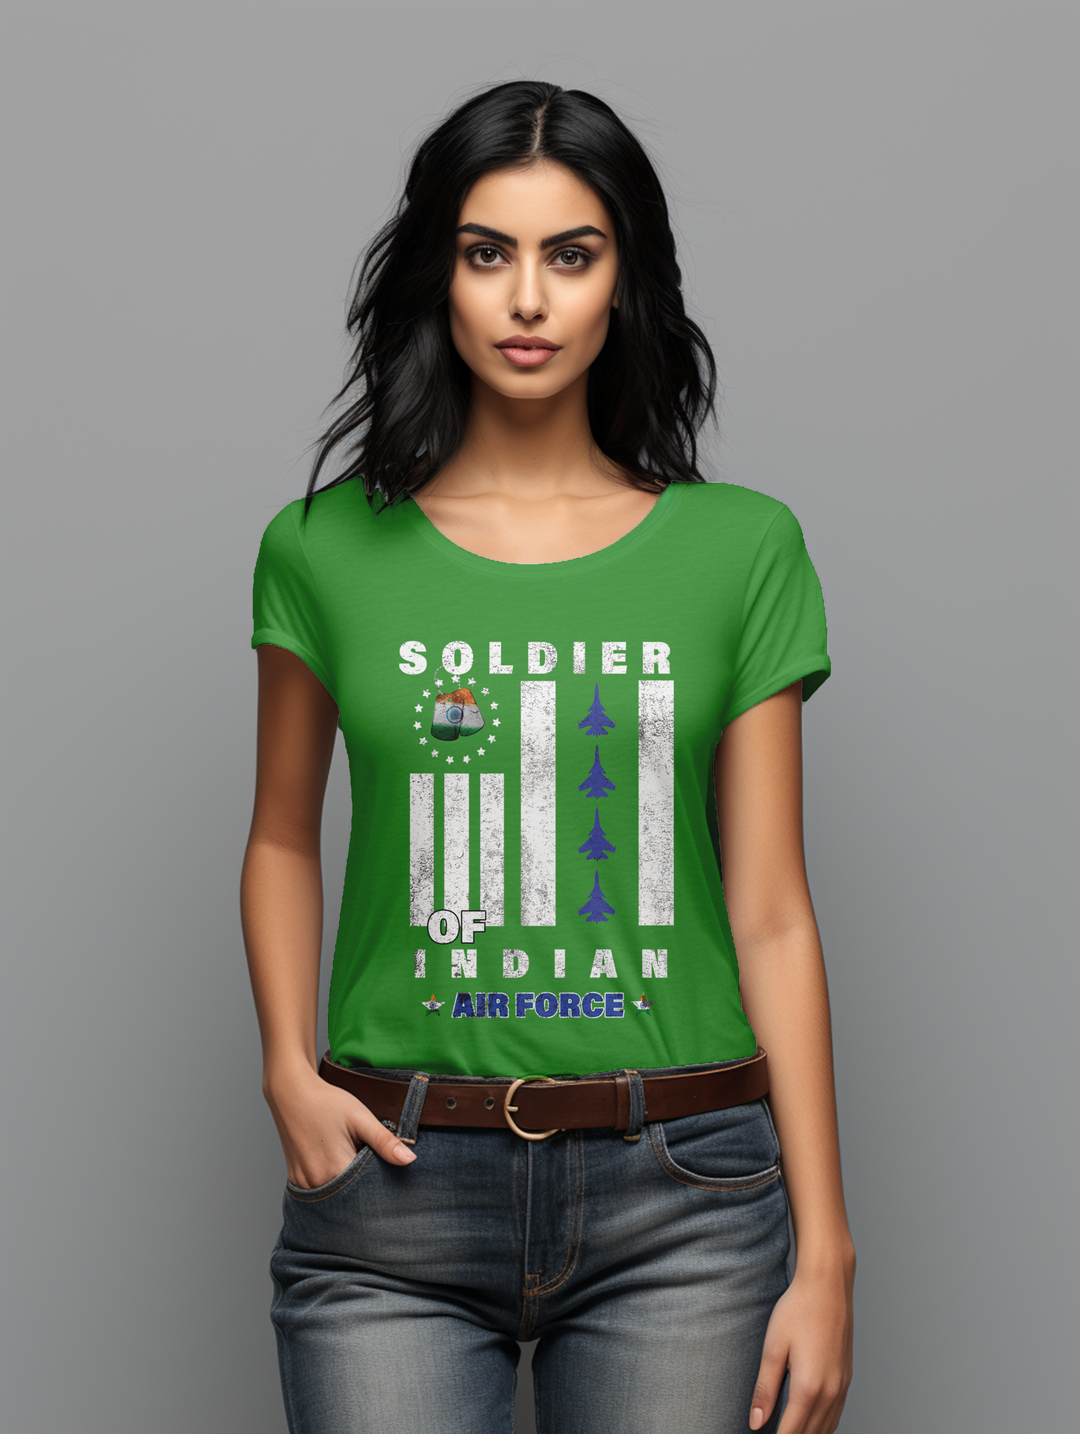 Womens Soldier of Indian Airforce tee